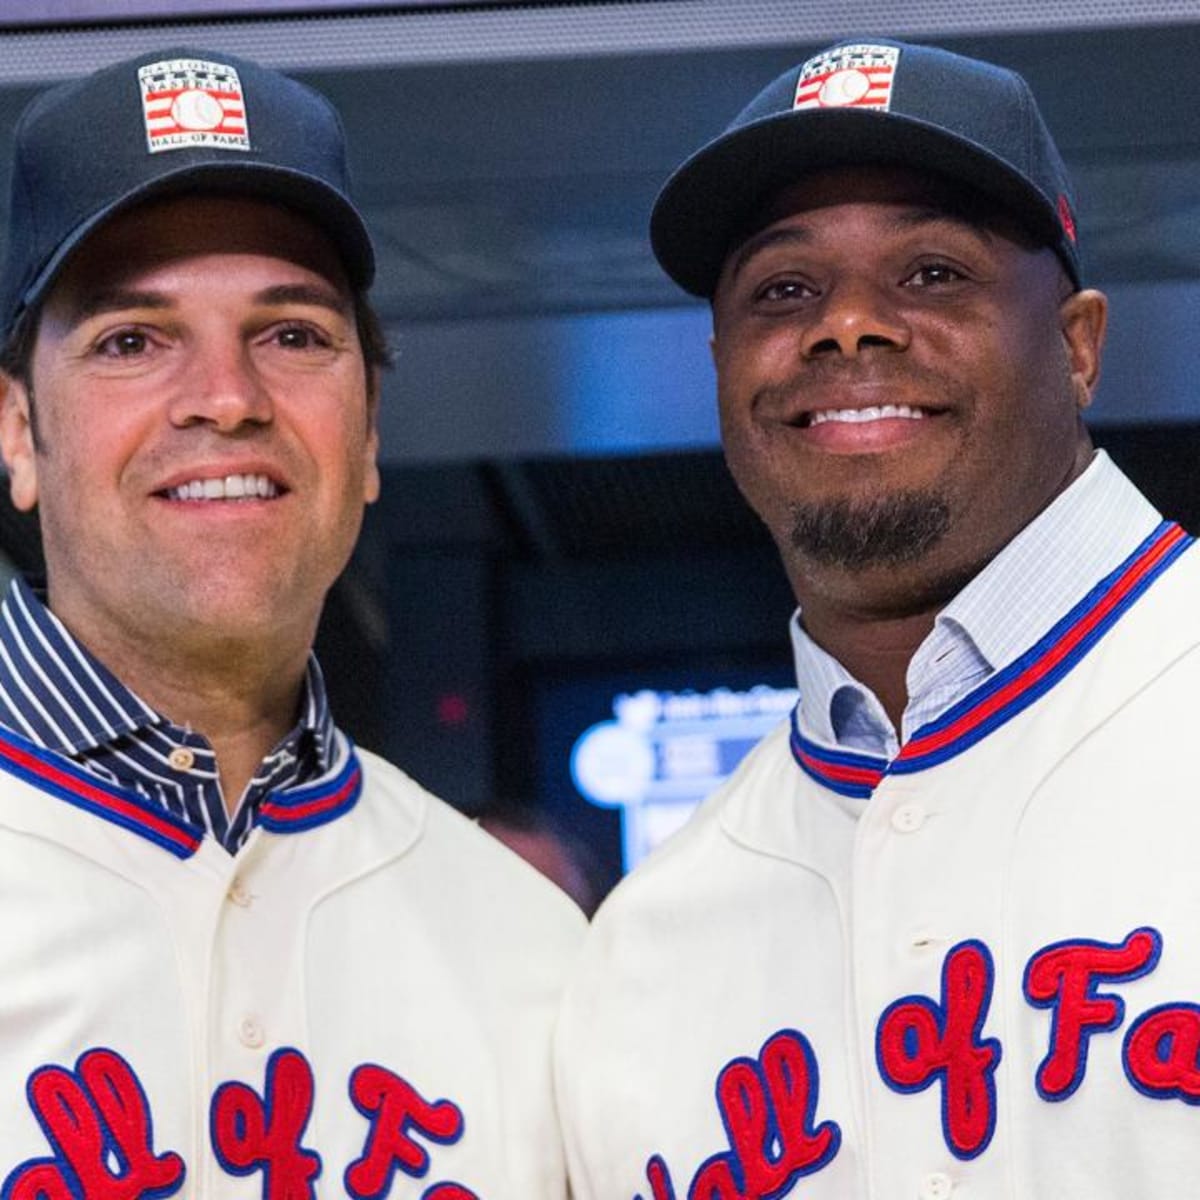 Mike Piazza and Ken Griffey Jr. inducted into Baseball Hall of